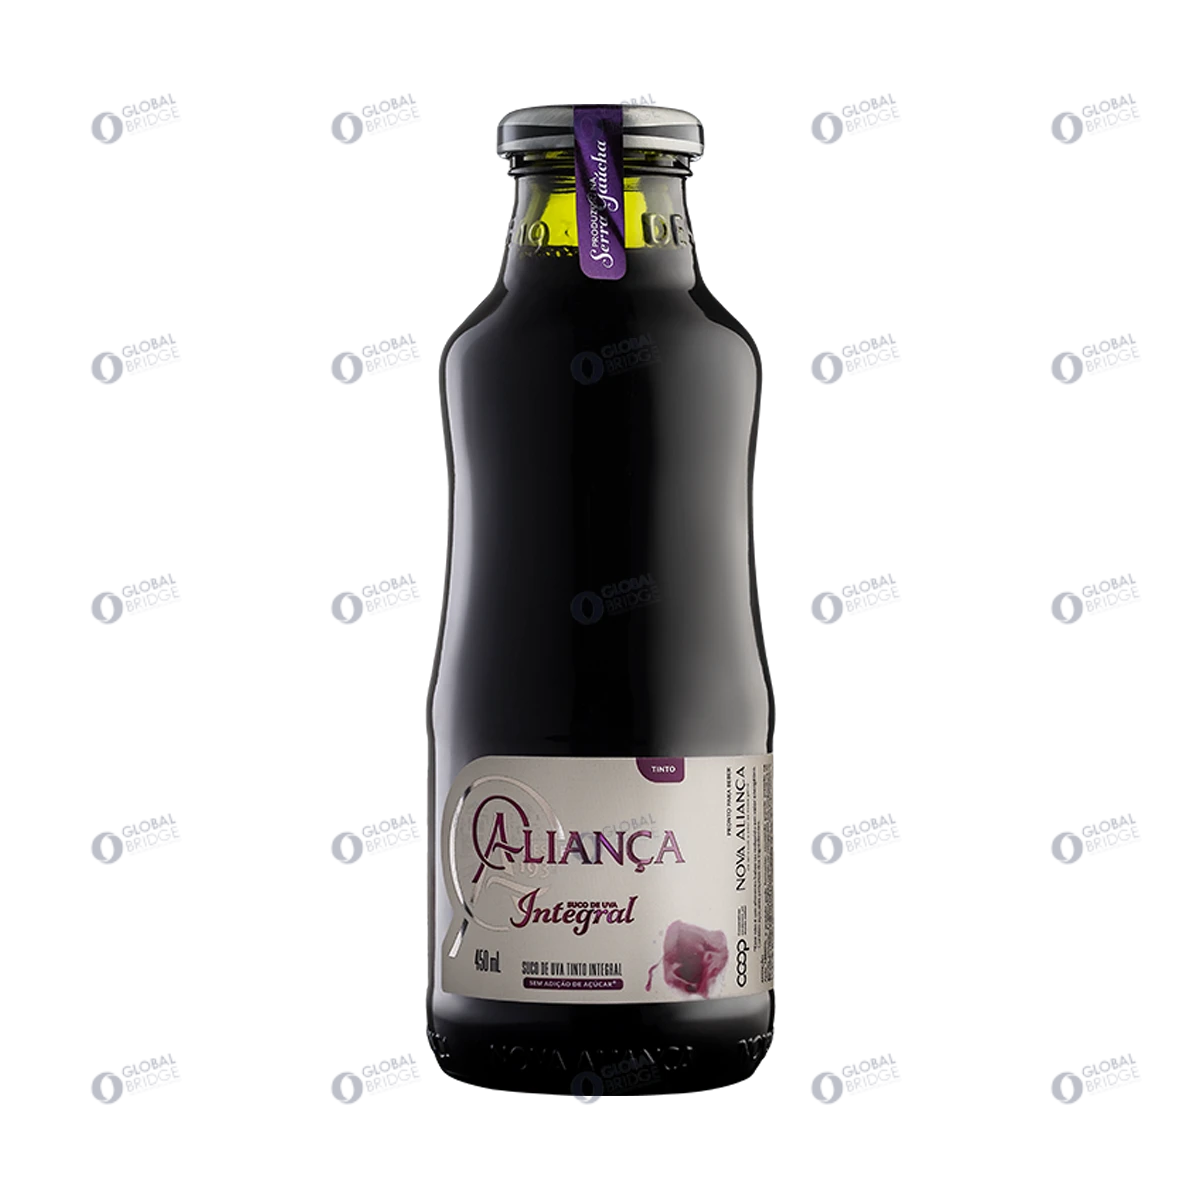 Whole Red Grape Juice Alianca Made in Brazil Bottle TetraPak Pure Soft Drink American grapes Natural Fruit Juice Sugar Free